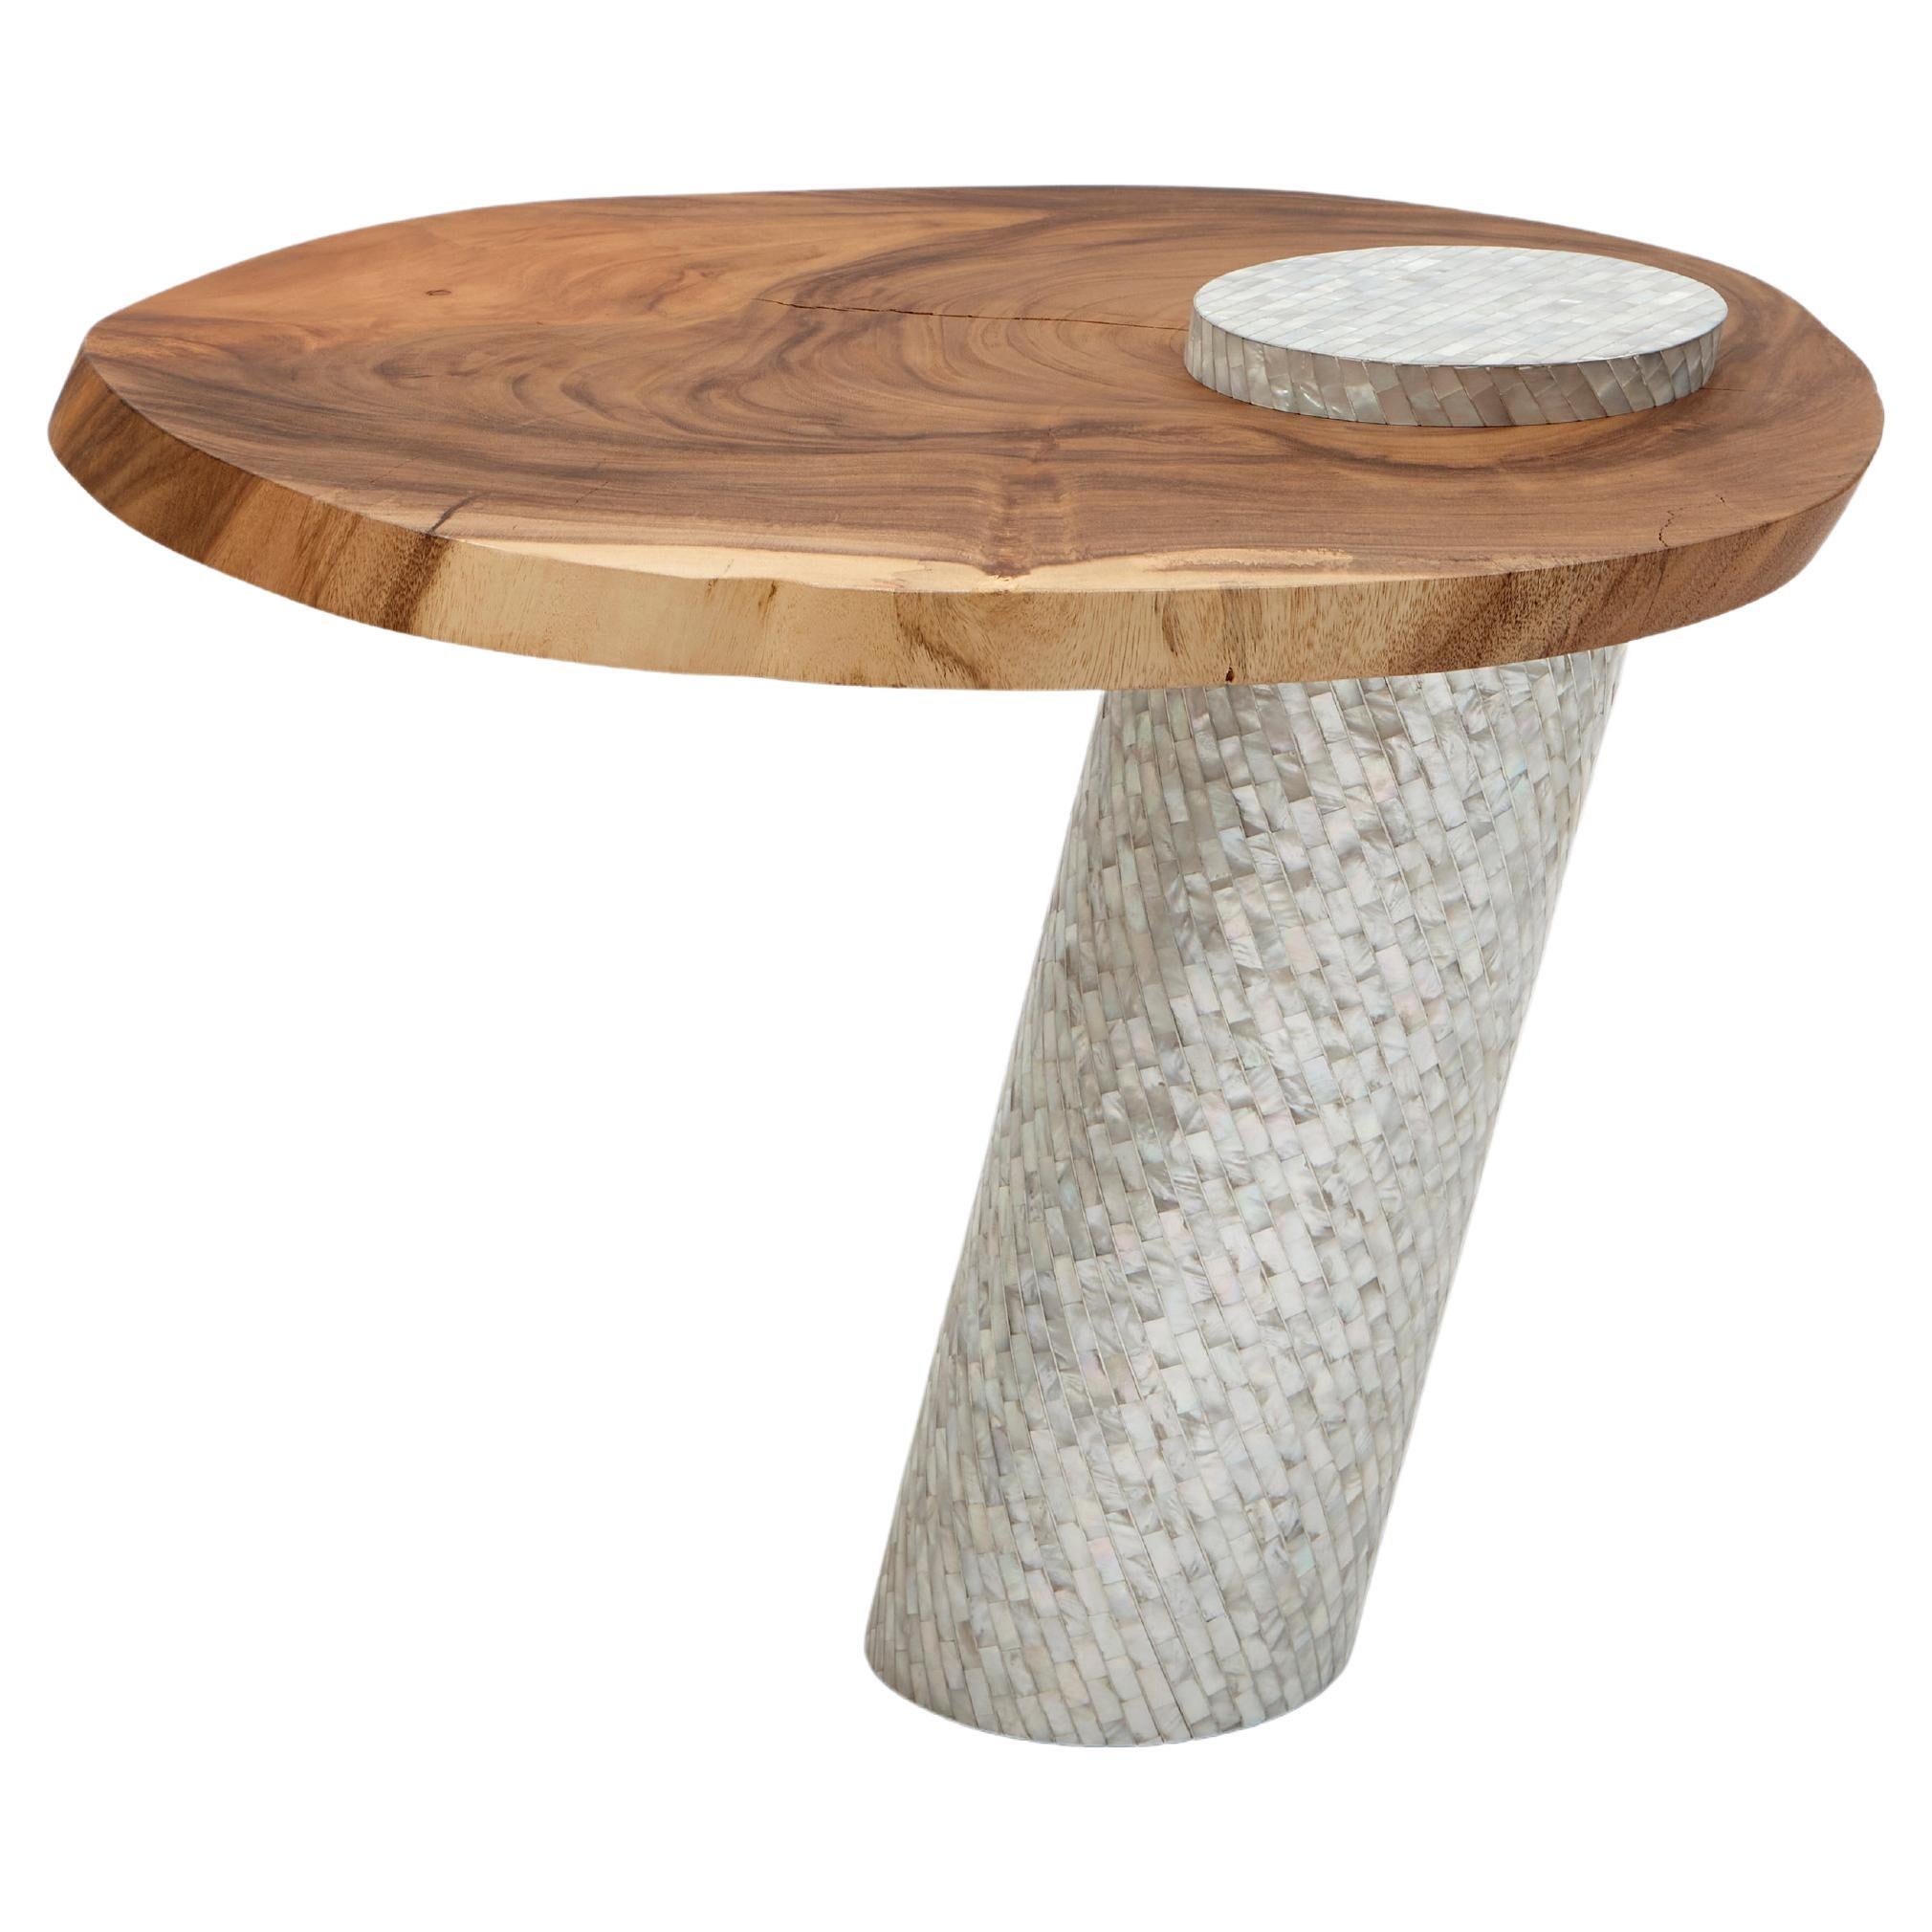 Coming to life table d'appoint n° 2 en vente